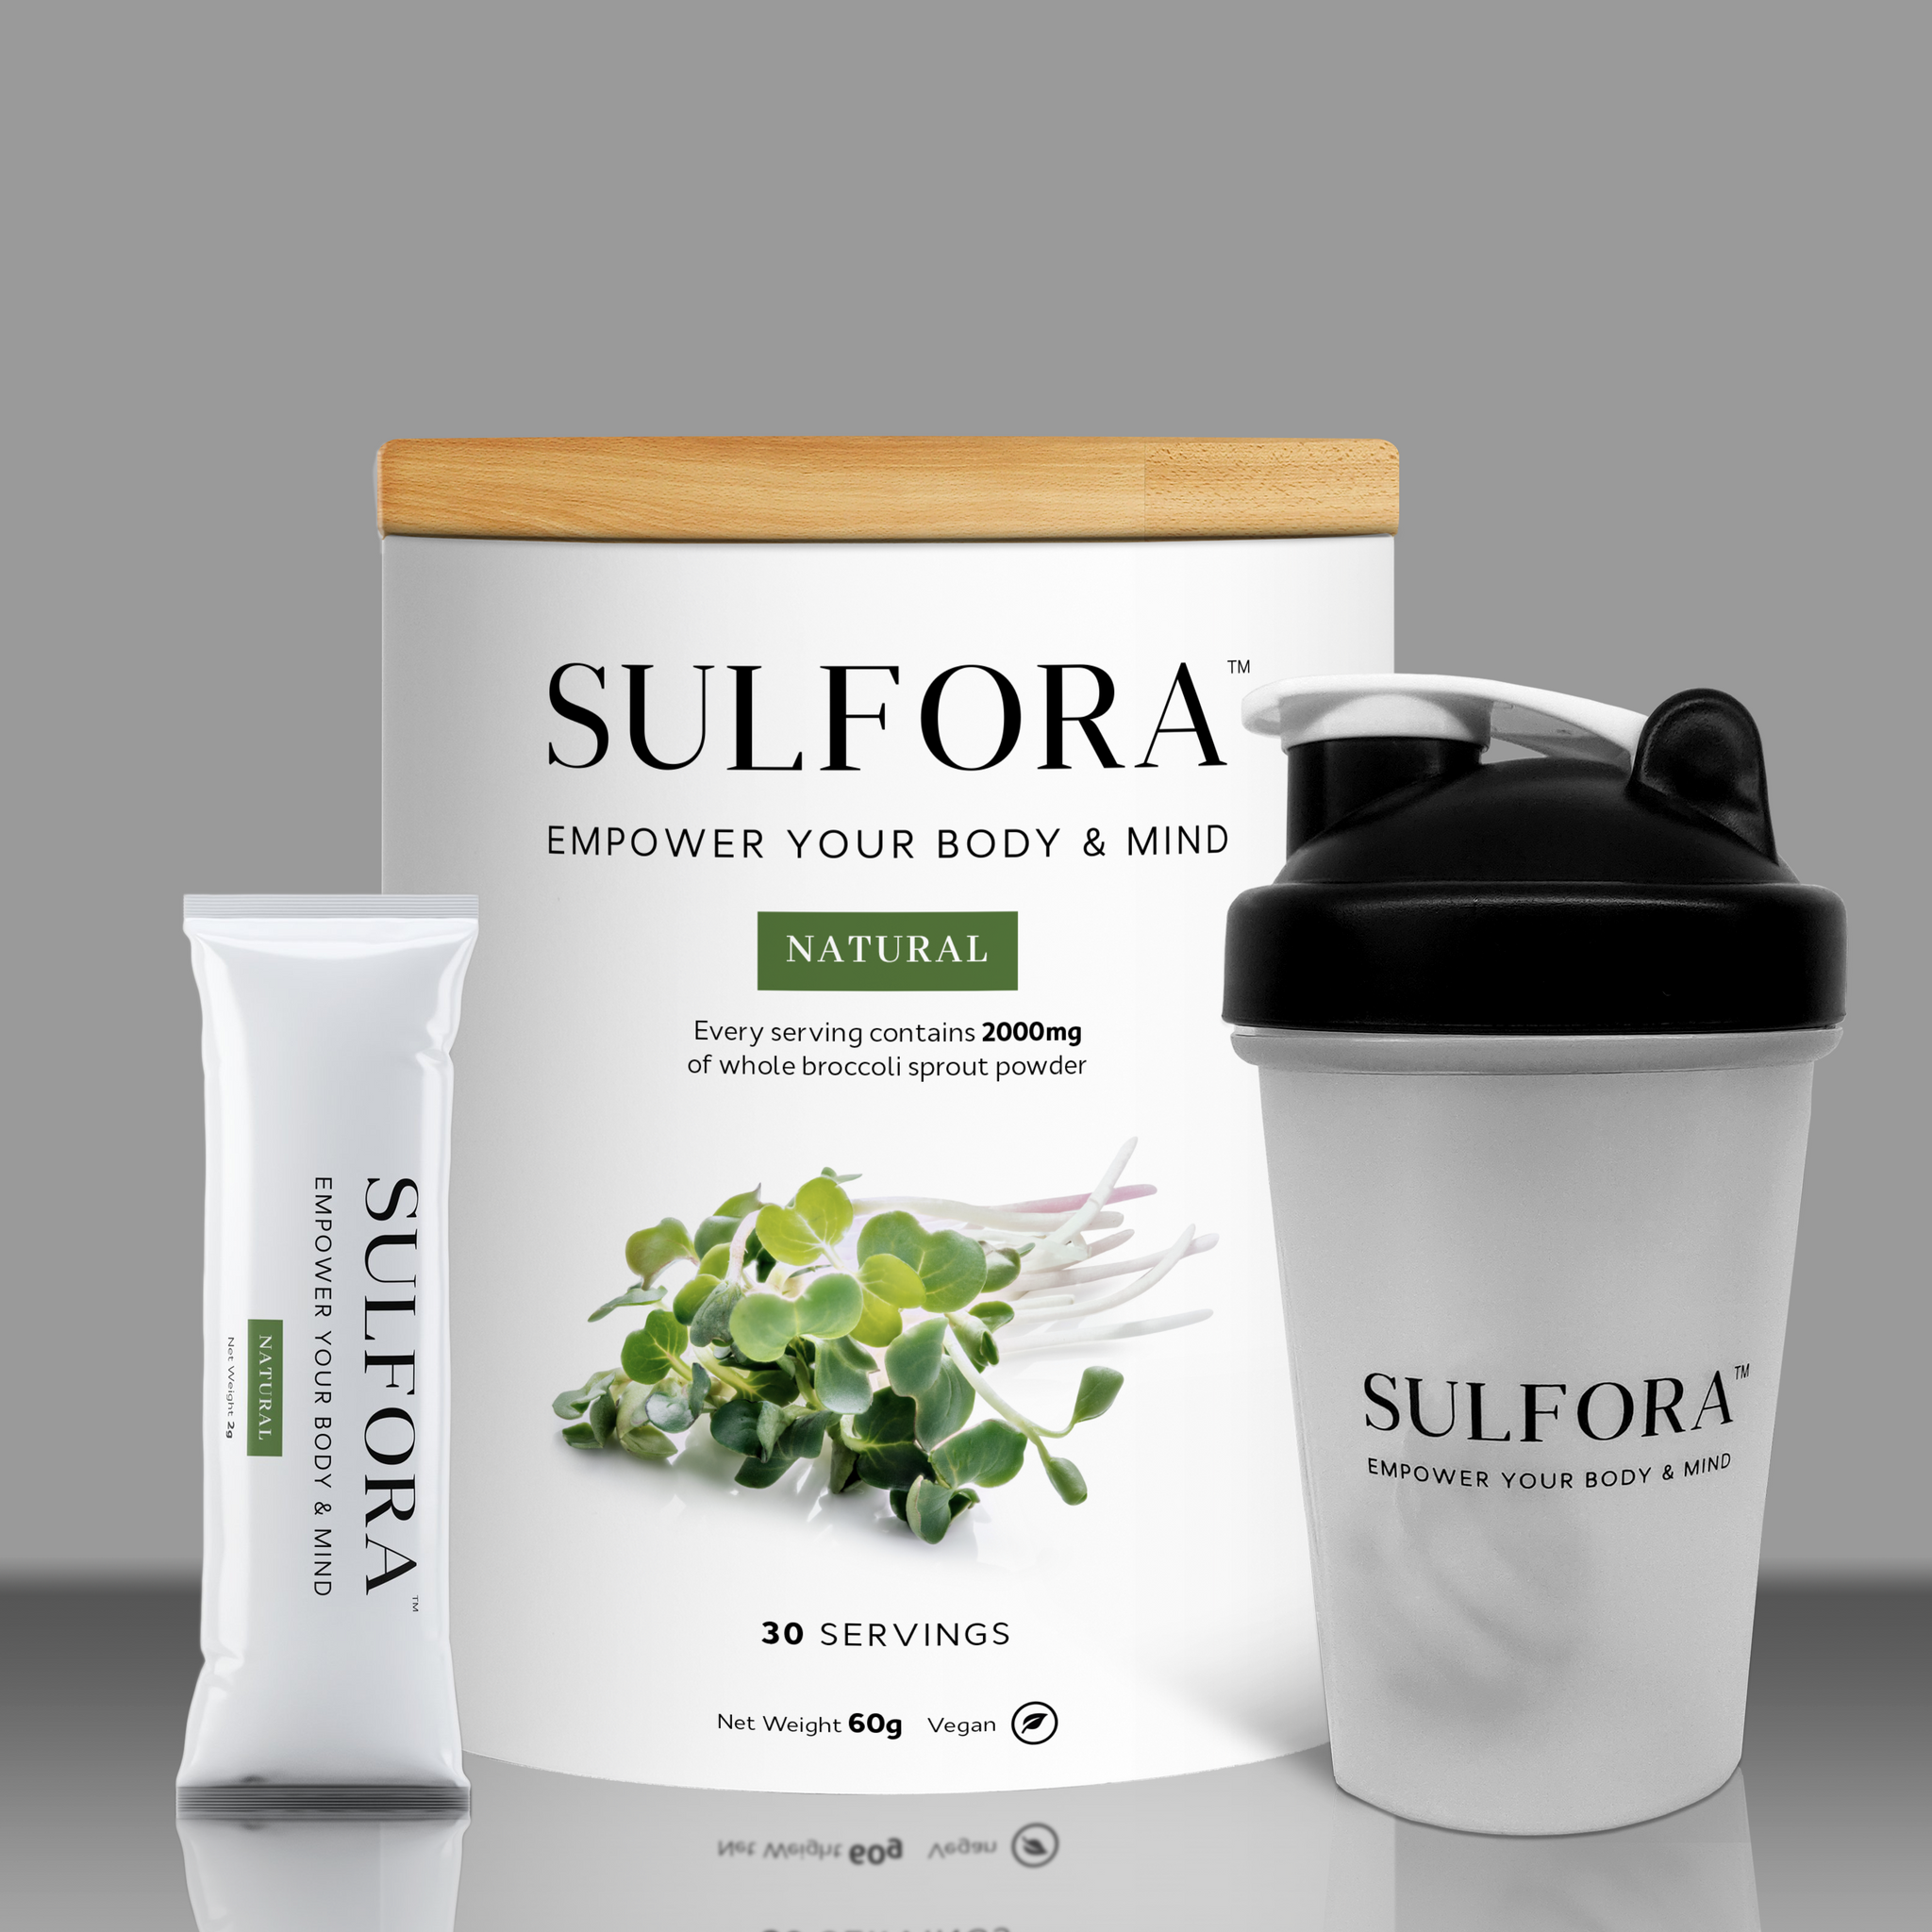 Sulfora® Supercharged Broccoli Sprout Powder